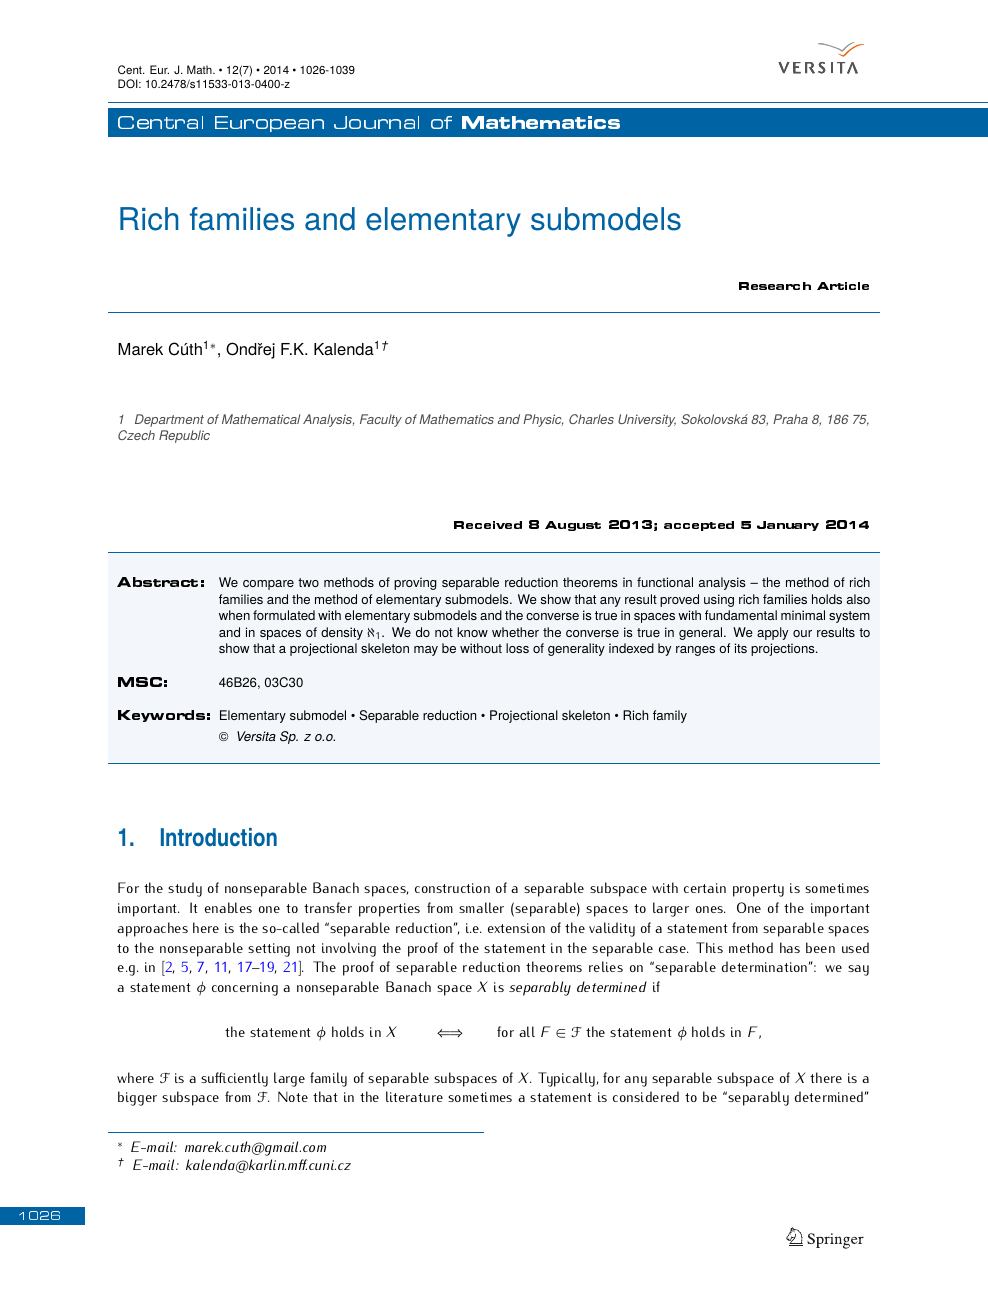 Rich Families And Elementary Submodels Topic Of Research Paper In Mathematics Download Scholarly Article Pdf And Read For Free On Cyberleninka Open Science Hub